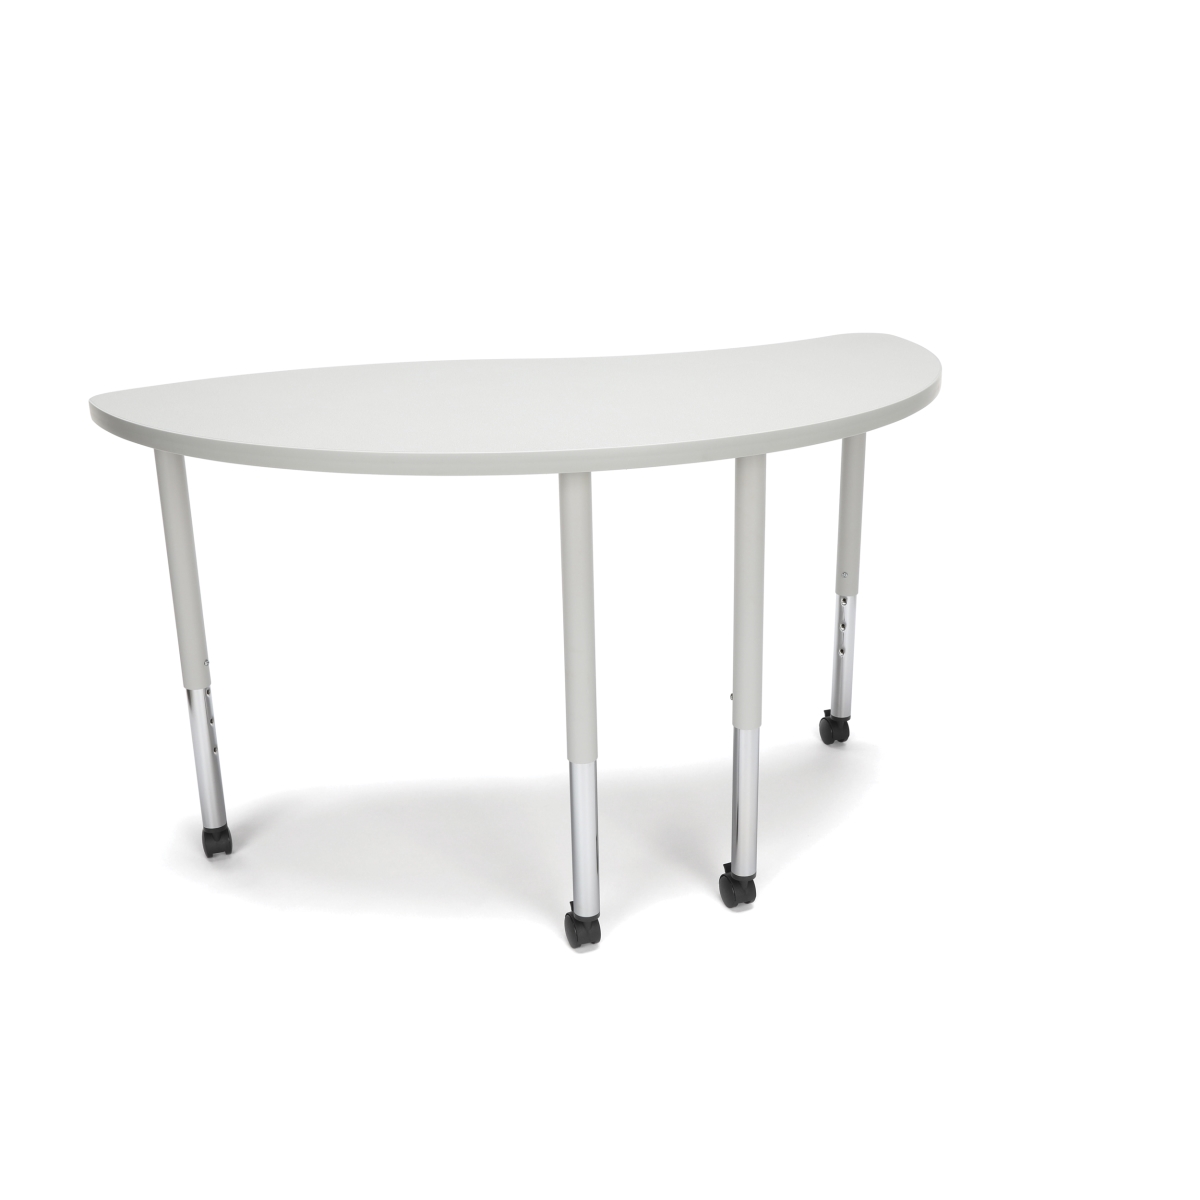 Ying-llc-grynb Adapt Series Ying Standard Table - 25-33 In. Height Adjustable Desk With Casters, Gray Nebula